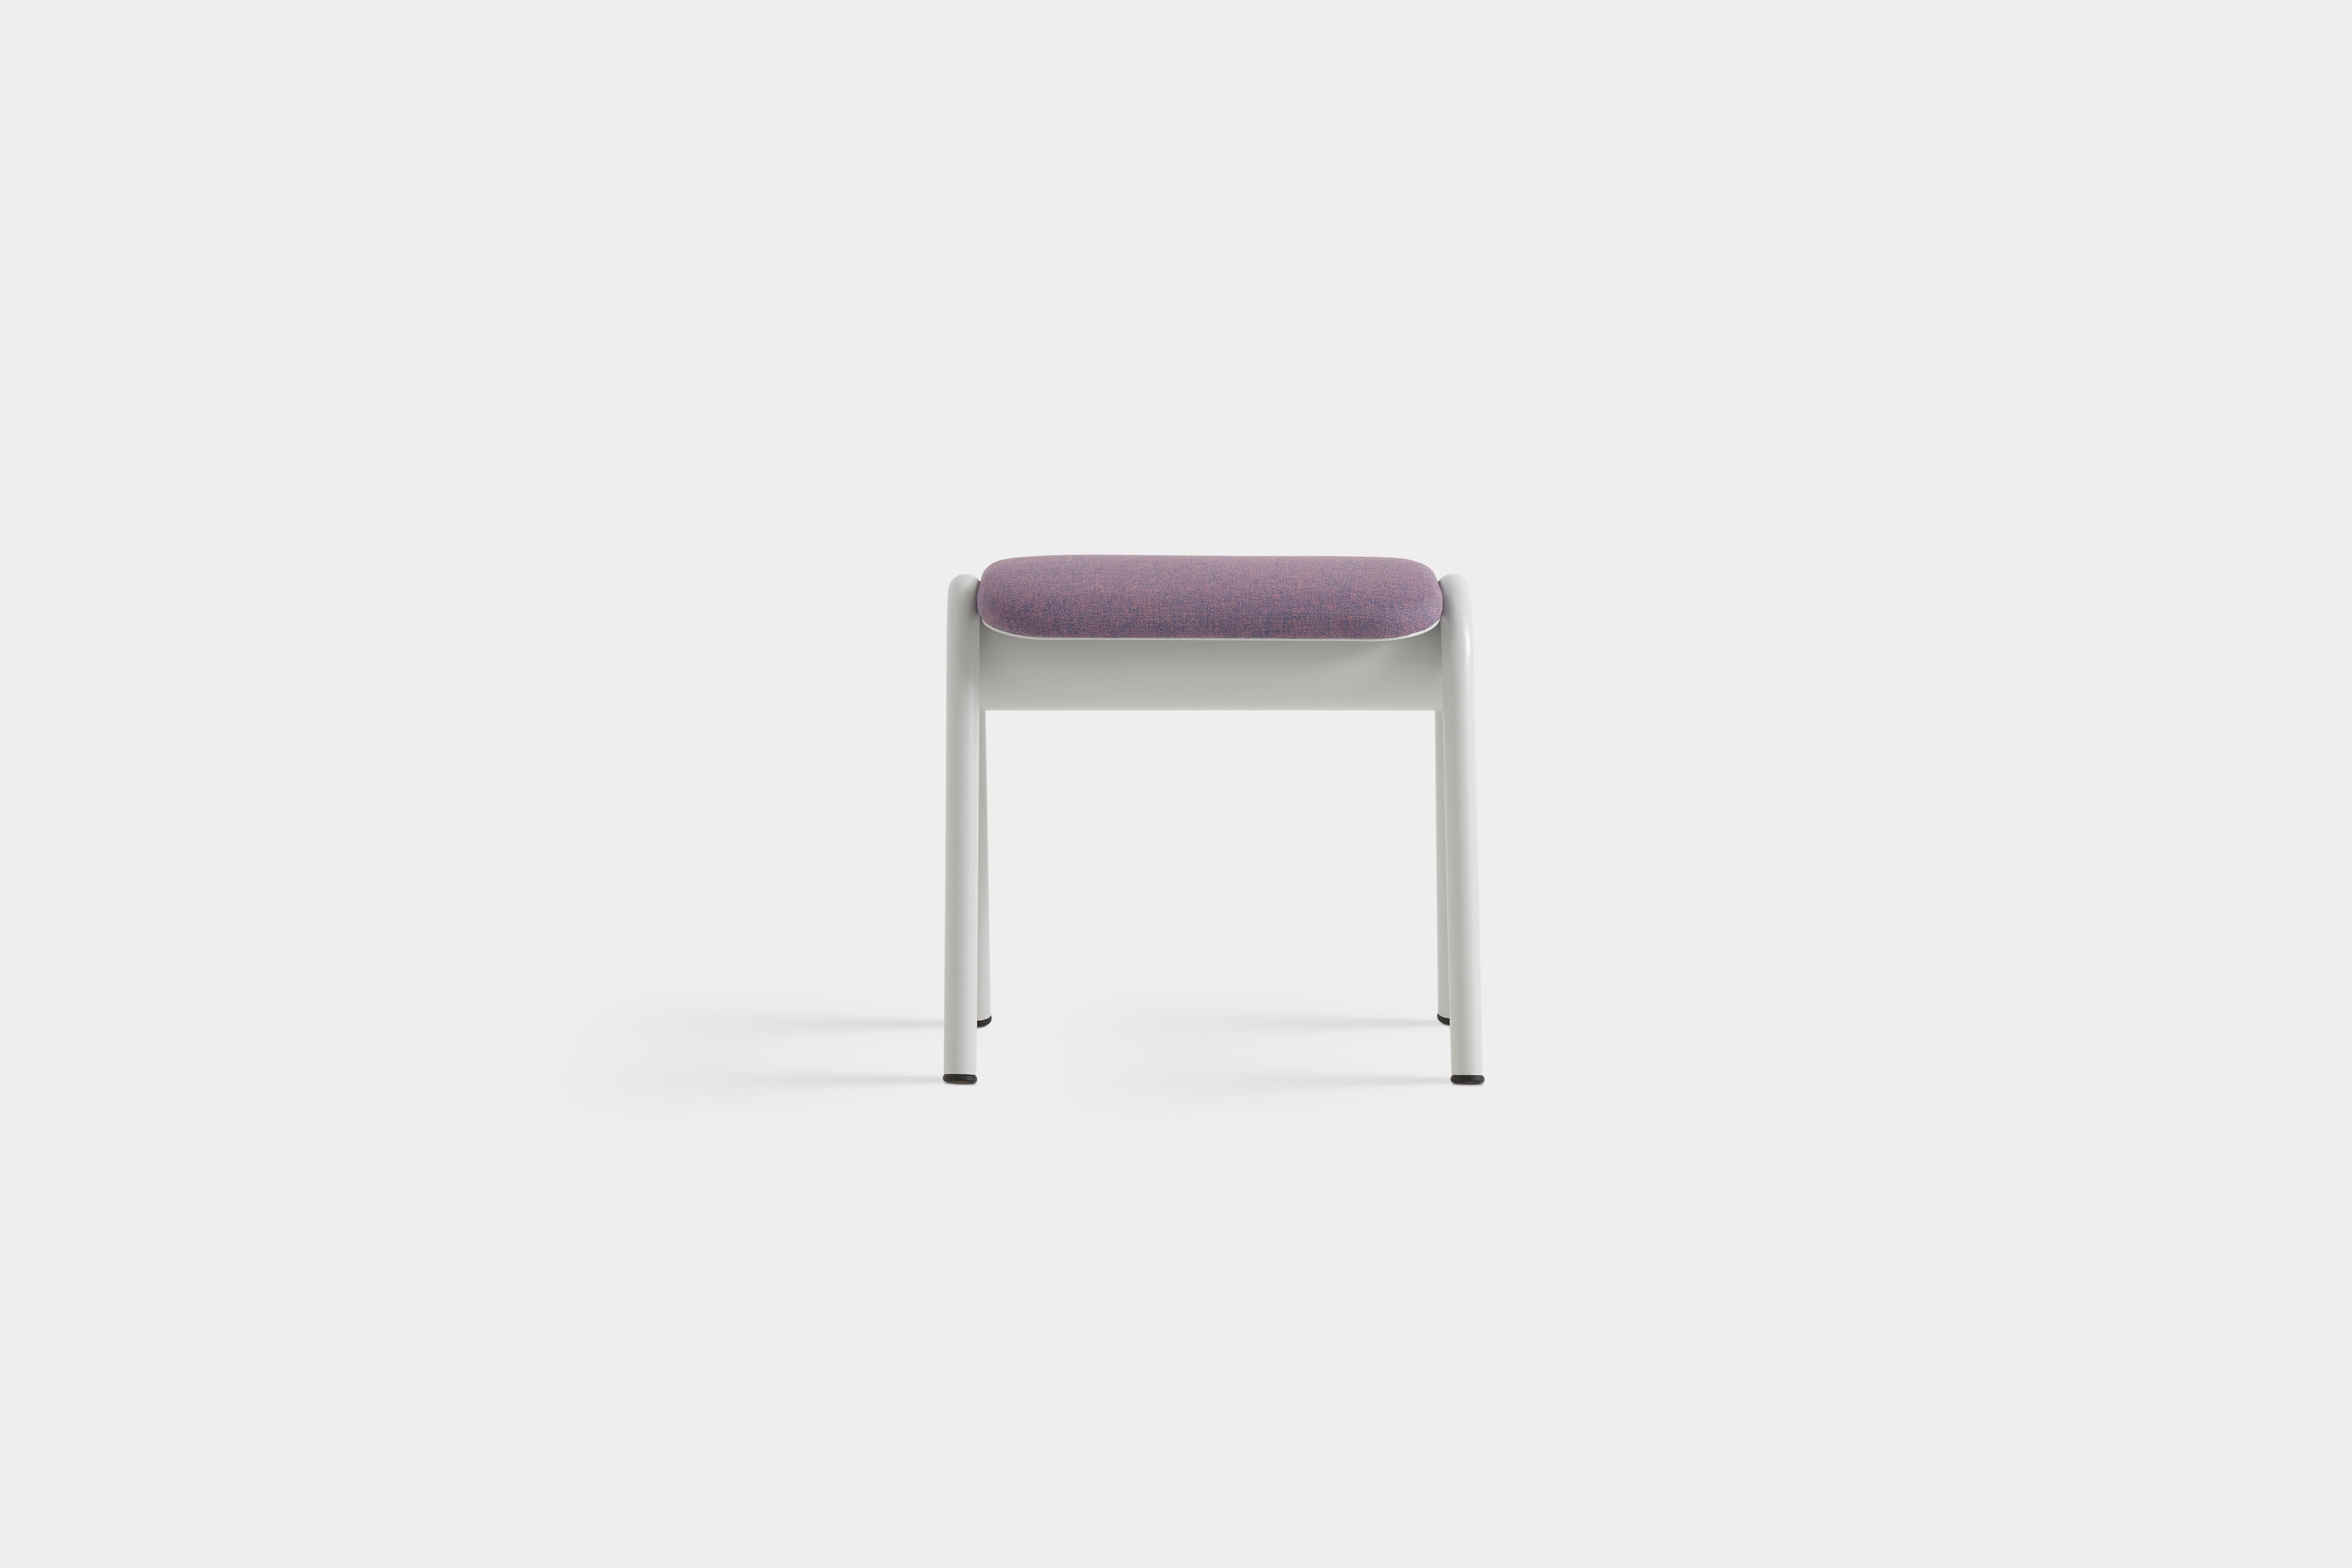 ZUM Stool by Pepe Albargues
Designed By Carlos Jiménez 
Dimensions: D 35 x W 49 x D 46 cm.
Materials: Aluminum, foam, plywood and upholstery.

Curved plywood seat. Aluminum structure lacquered any RAL color. Foam CMHR (high resilience and flame